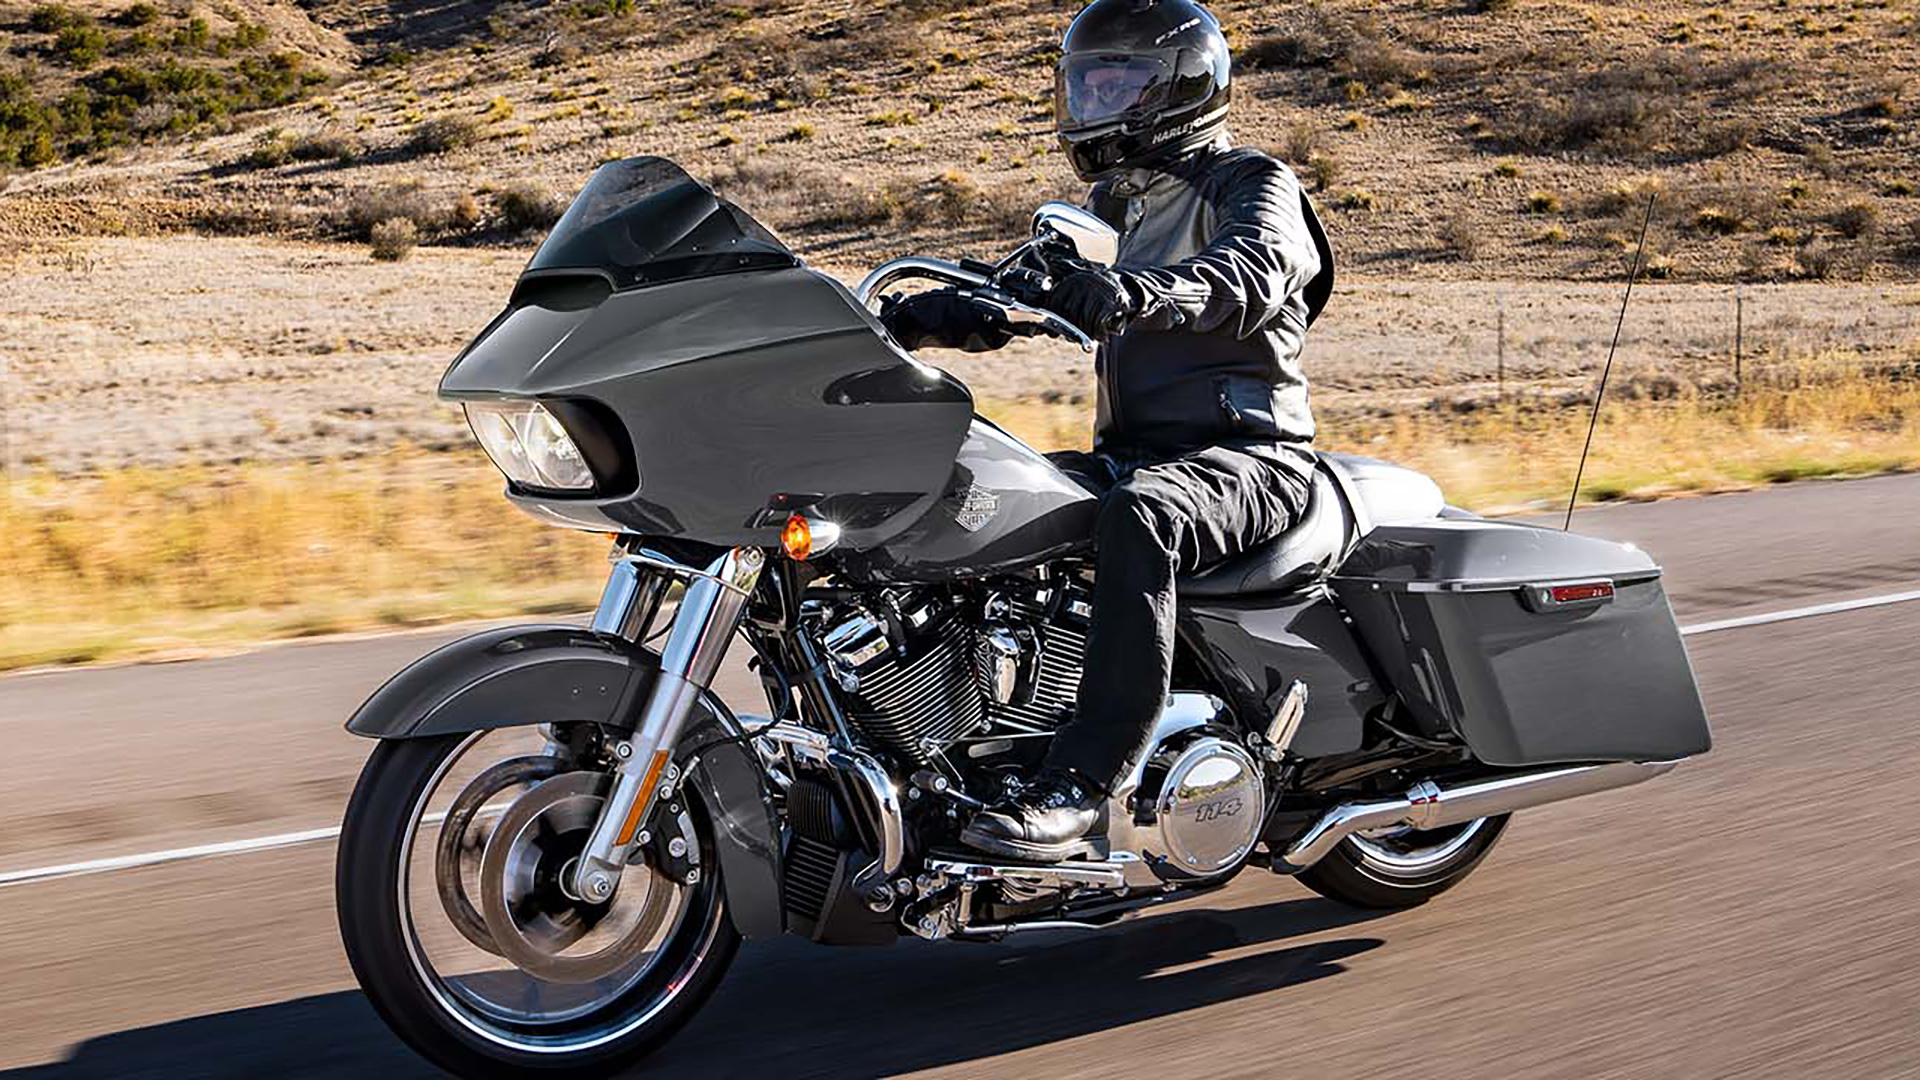 2022 Harley-Davidson Road Glide® Special in Temple, Texas - Photo 4